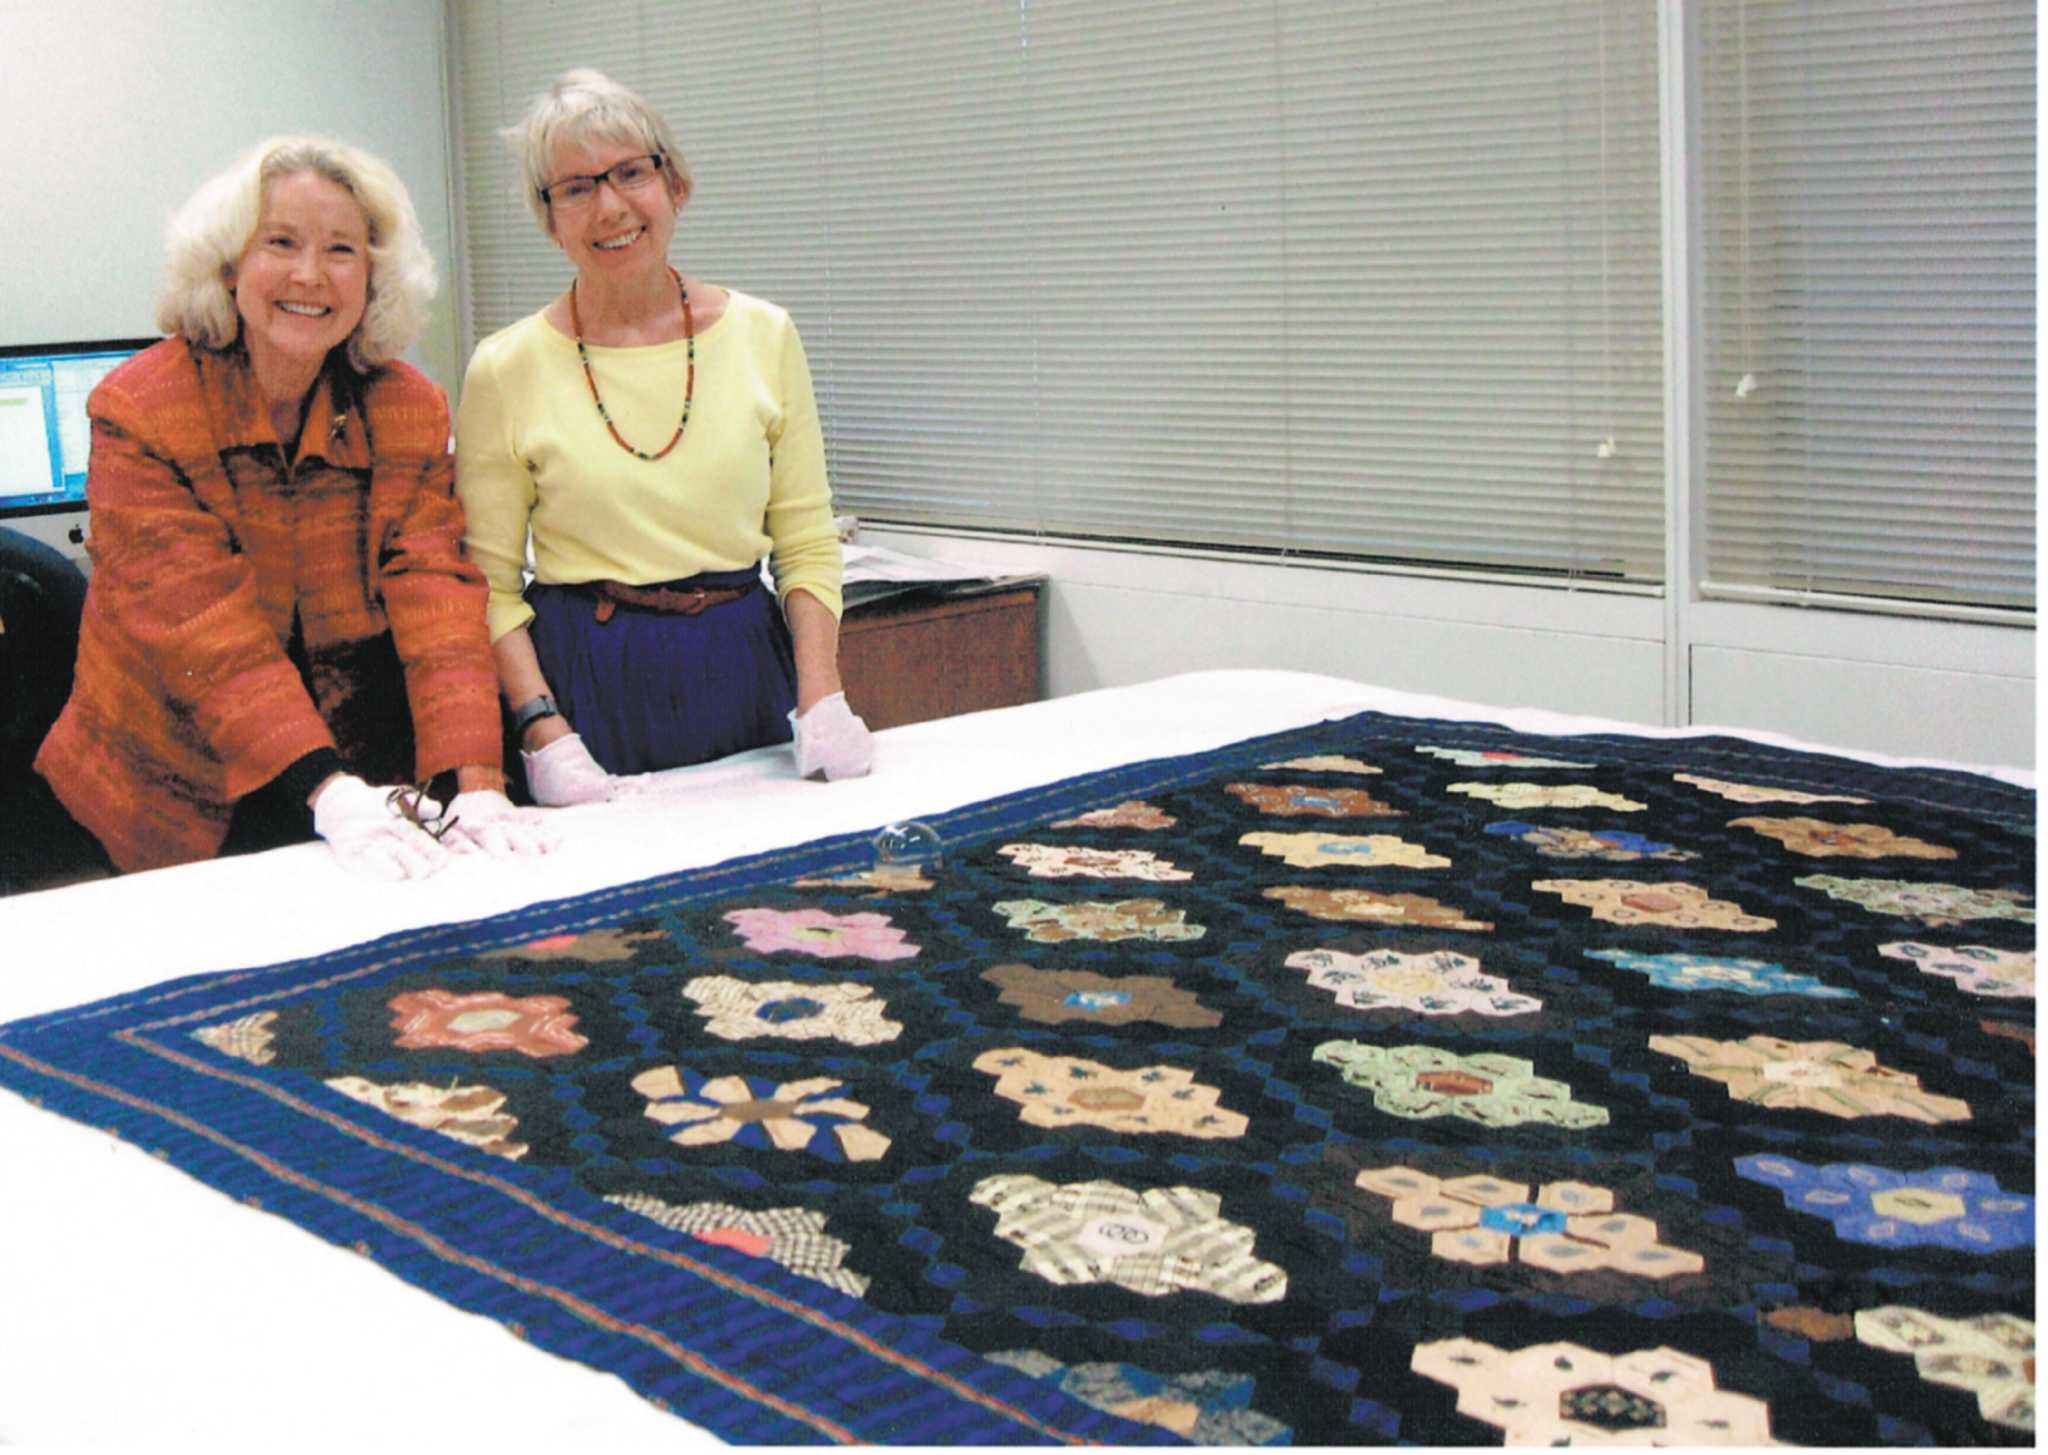 Rare Civil War quilt found in Texas has a mysterious story - Houston Chronicle2048 x 1455